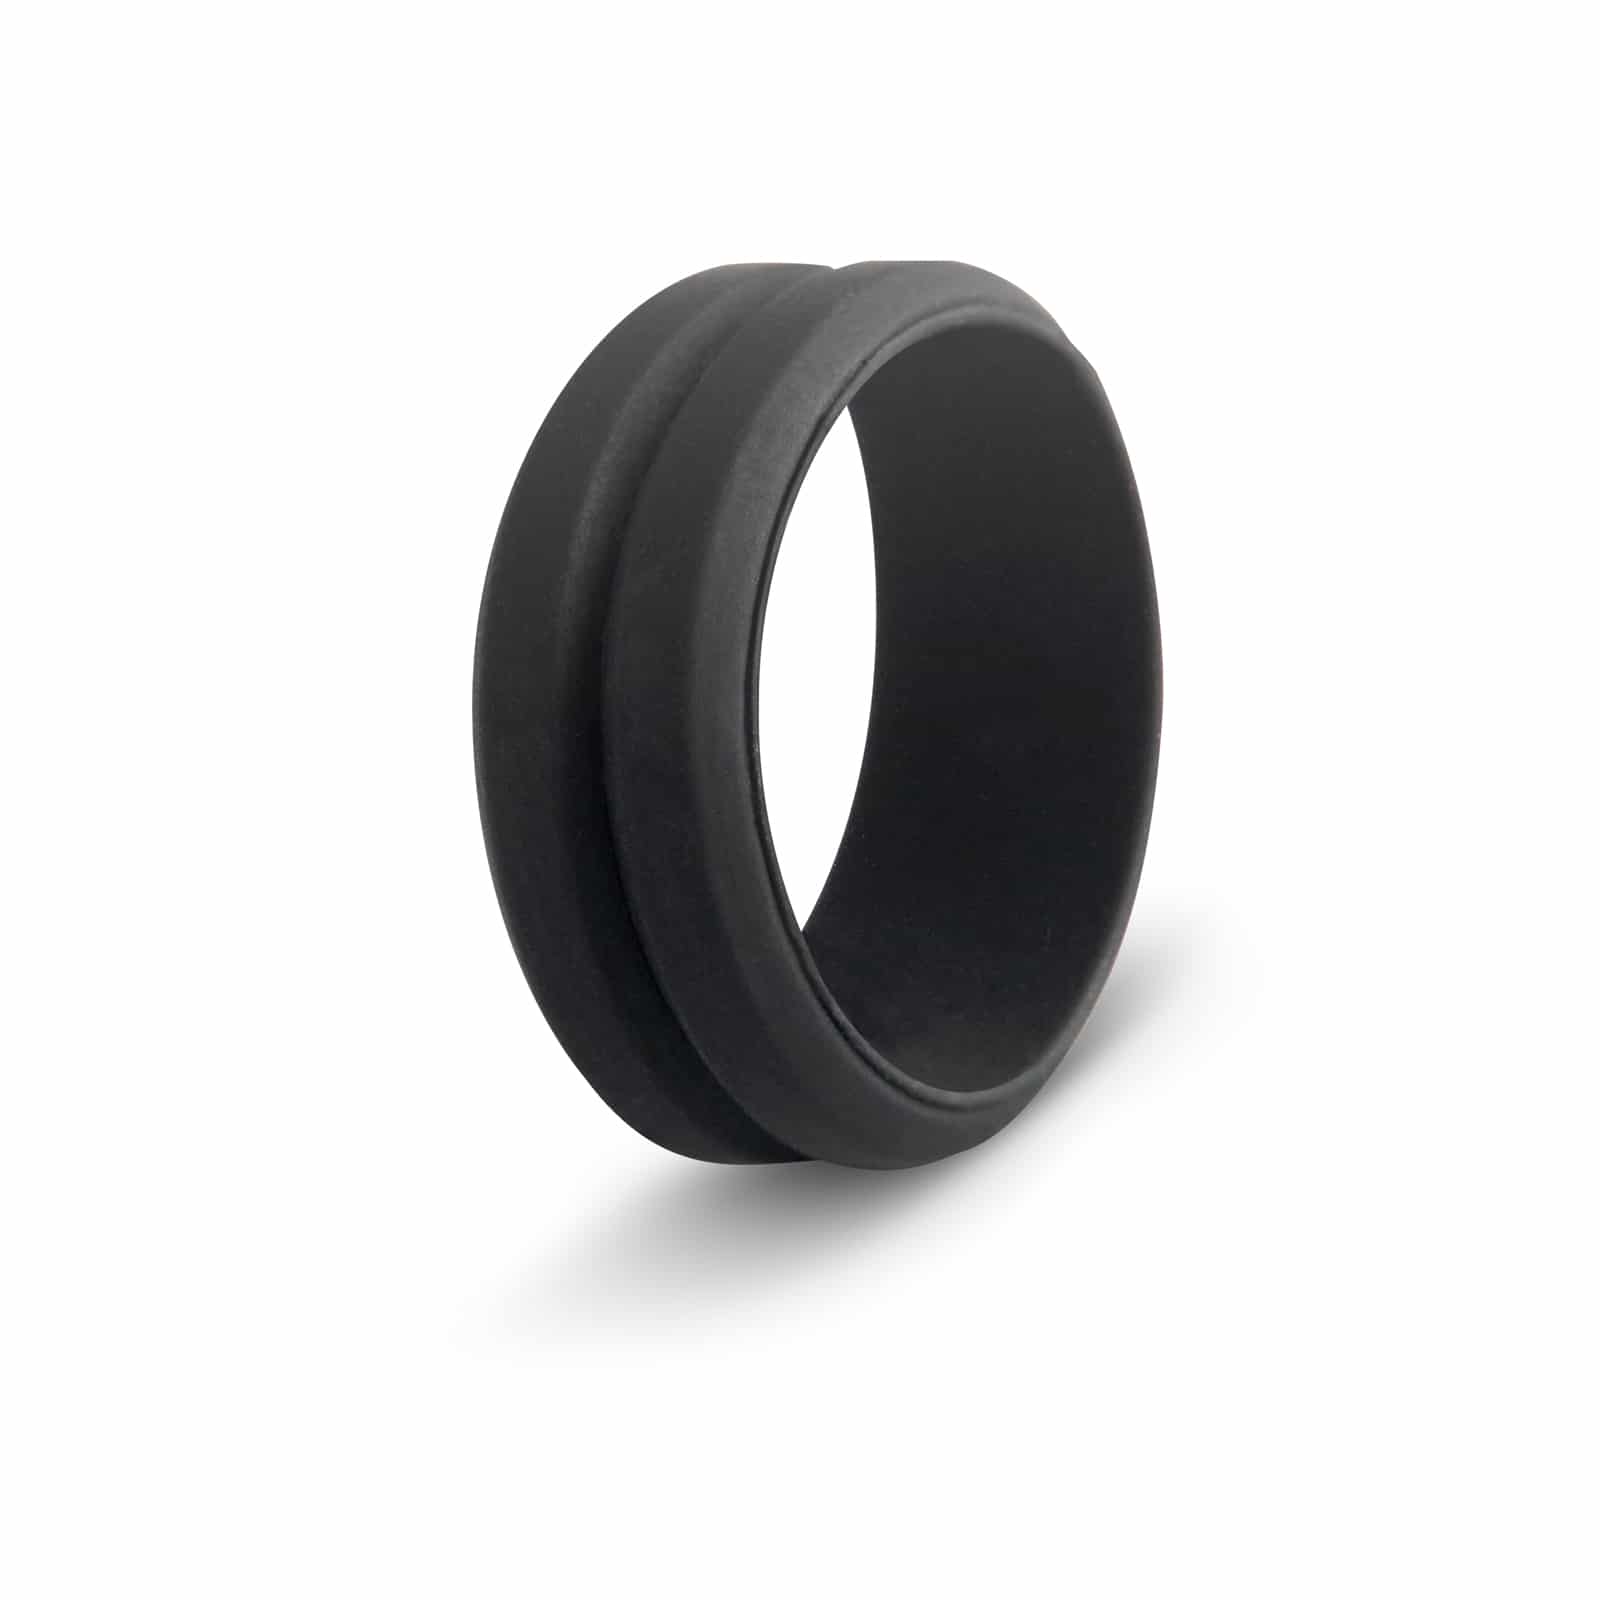 botthms Black Groove Silicone Ring